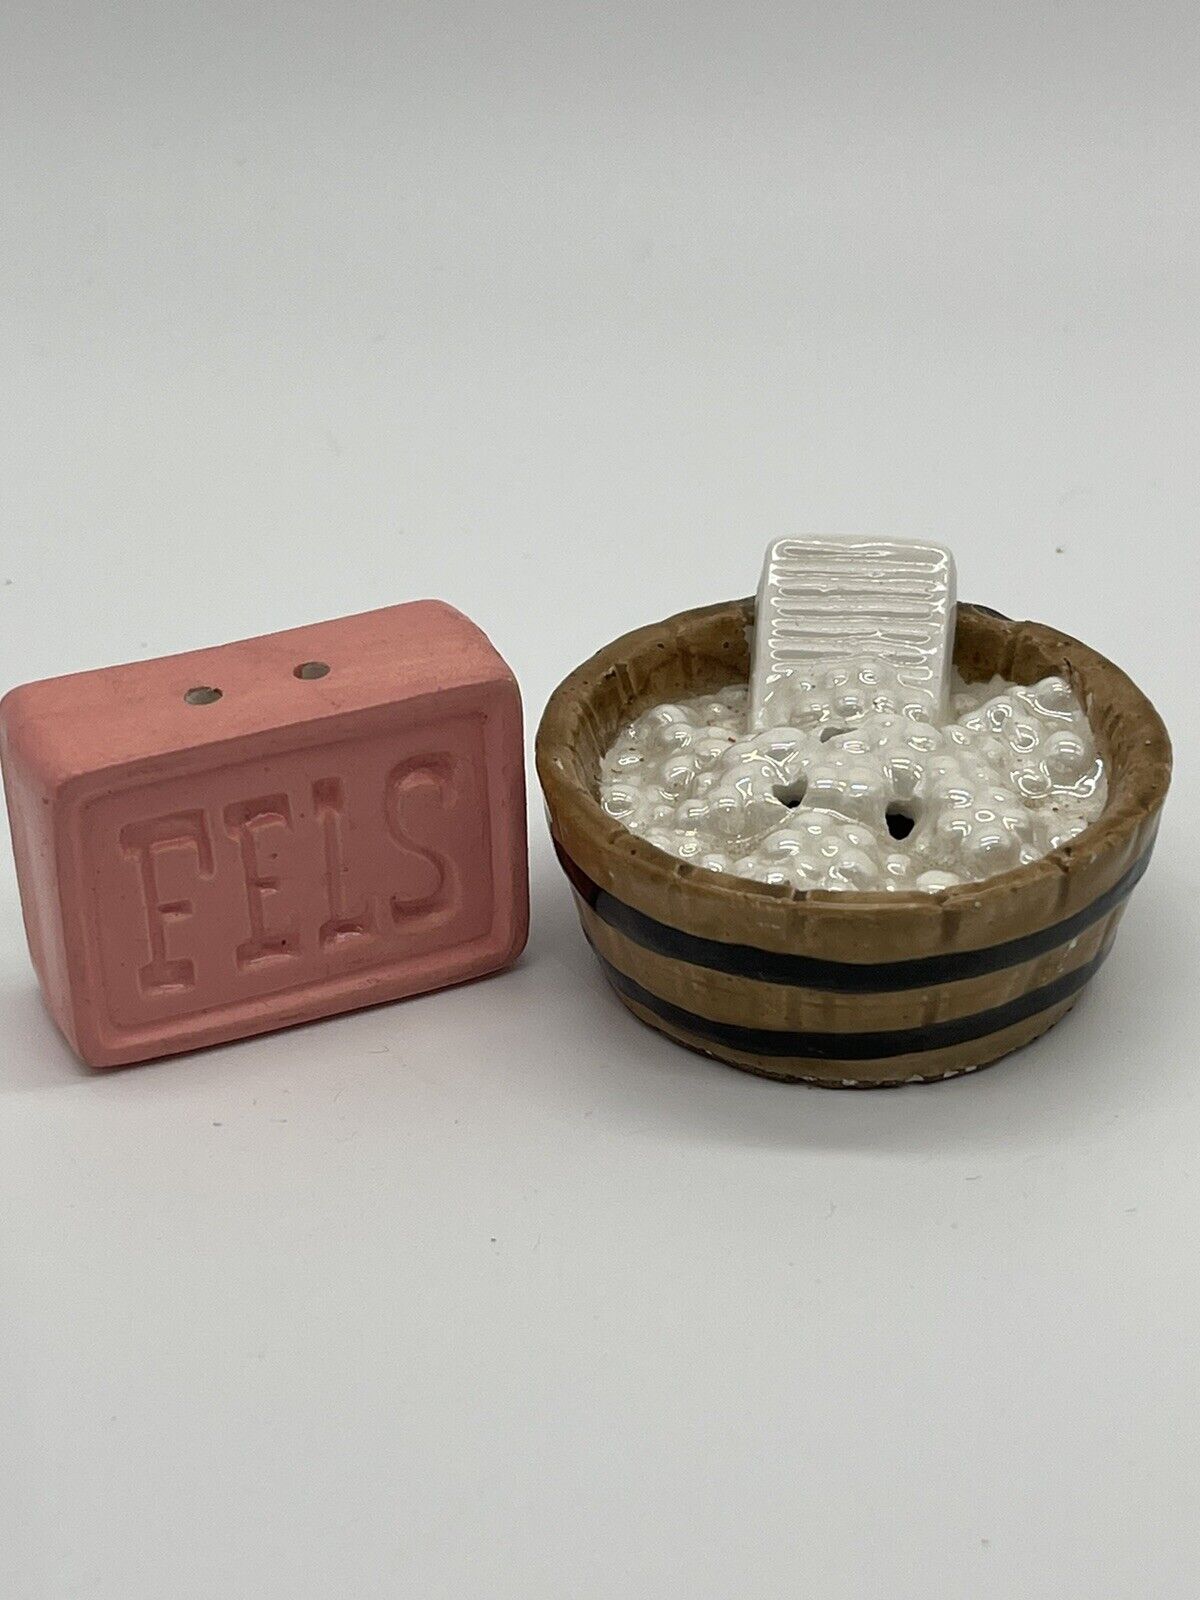 Vintage Enesco Miniature Wash Tub and Soap salt and pepper shakers